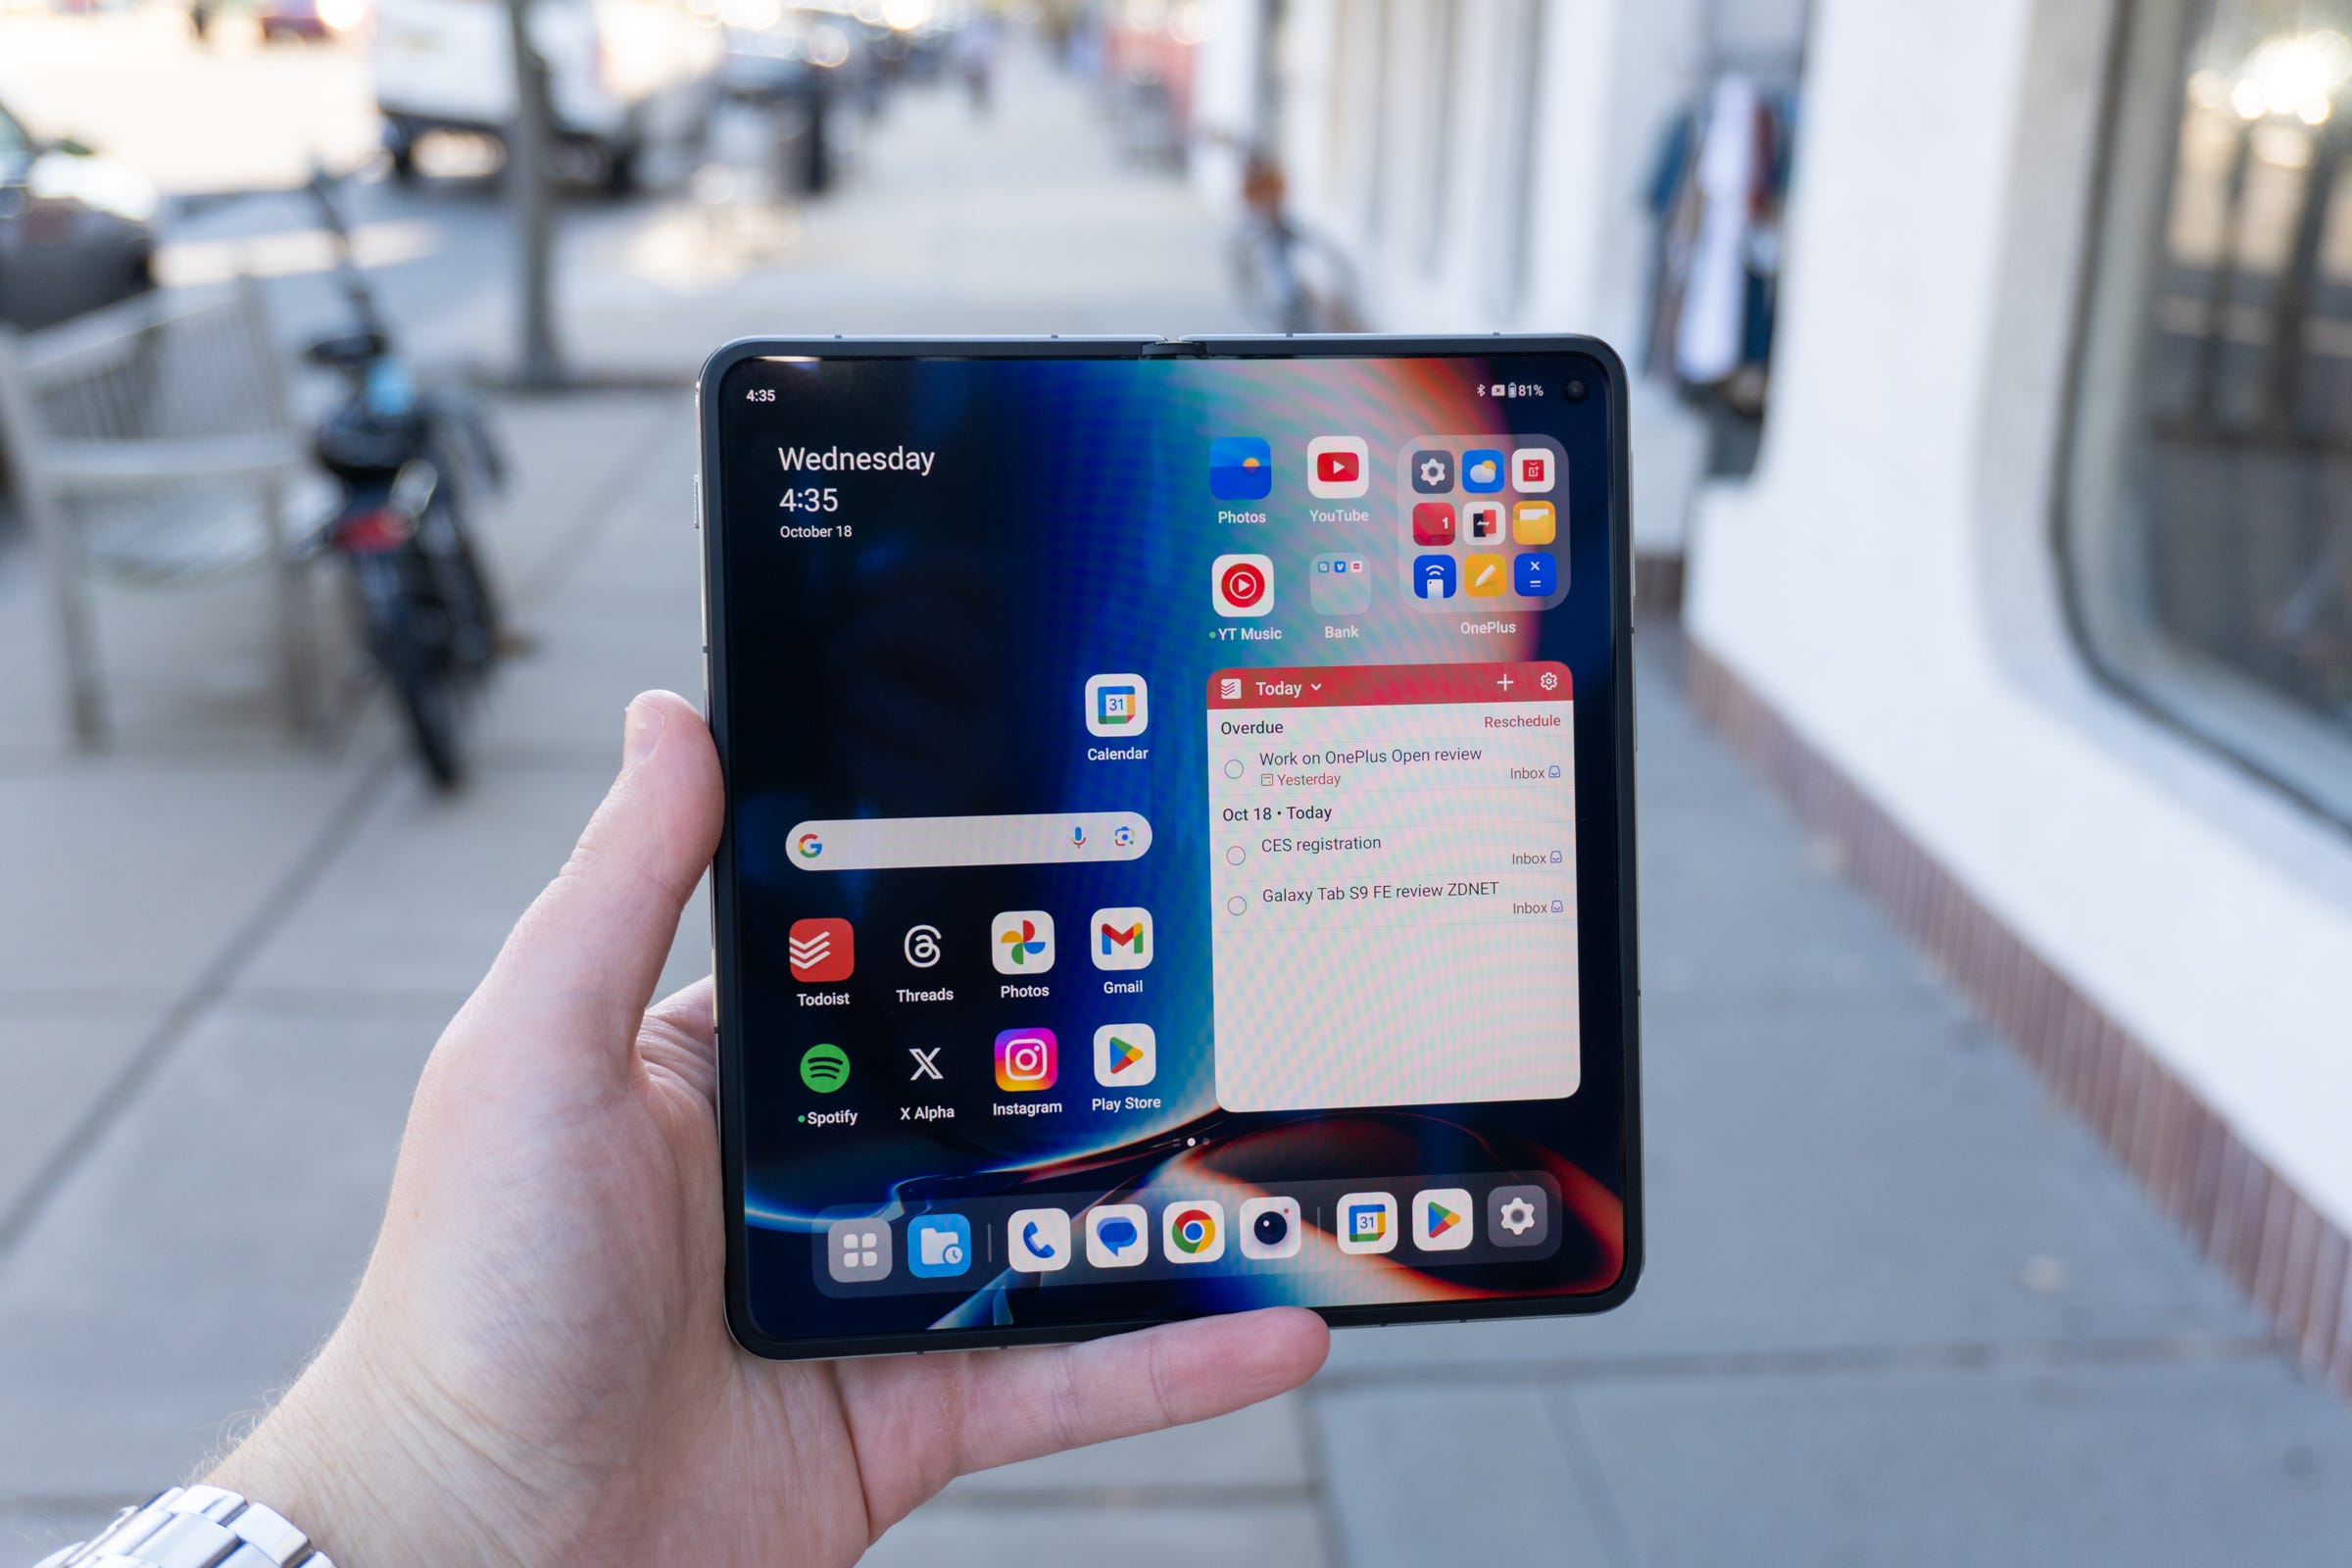 OnePlus Open: A Foldable Phone That Checks Most of the Boxes [Review] 